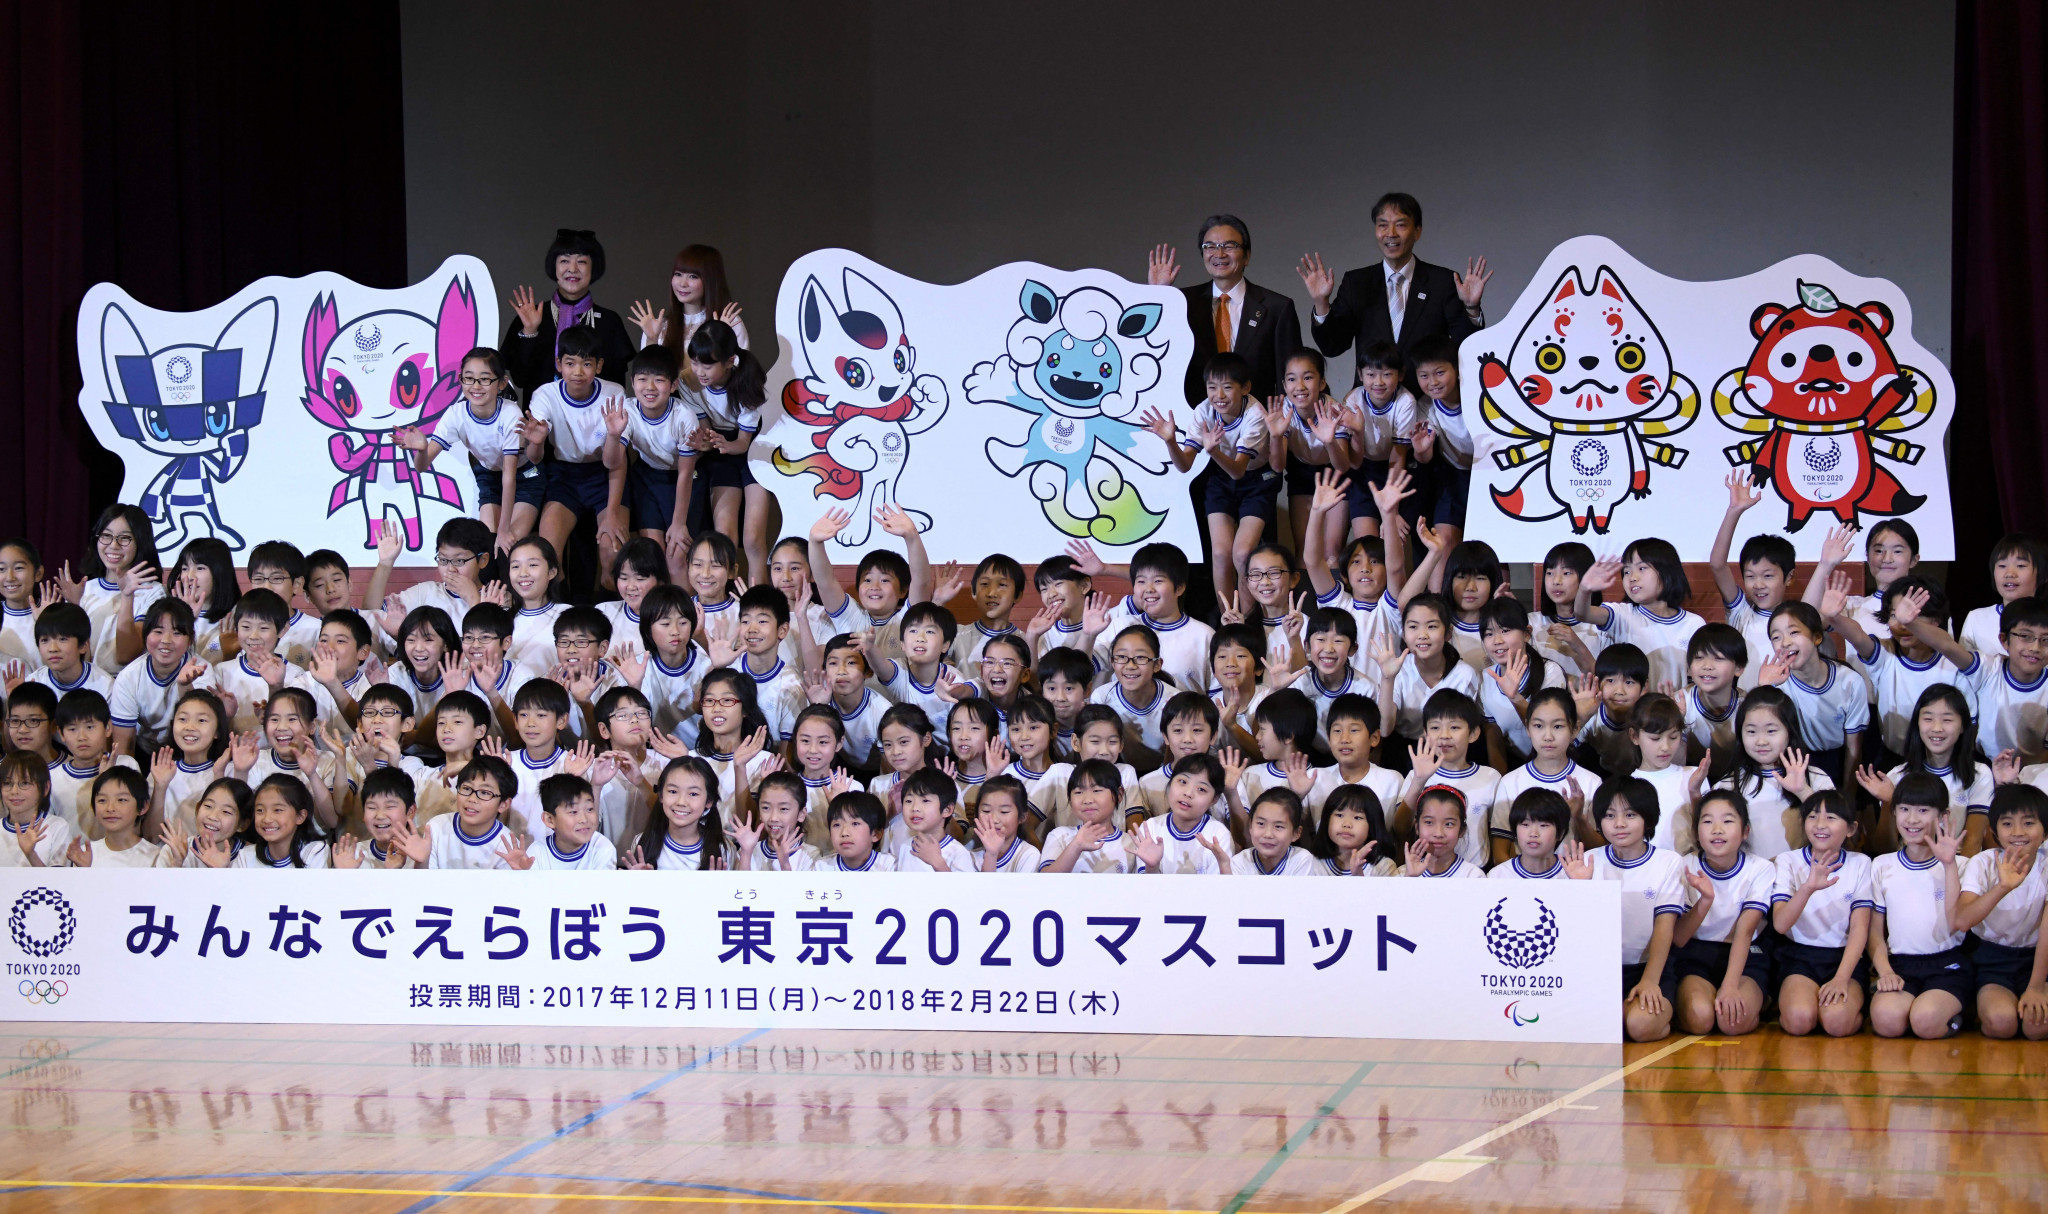 The Tokyo 2020 mascots will be revealed next week ©Getty Images